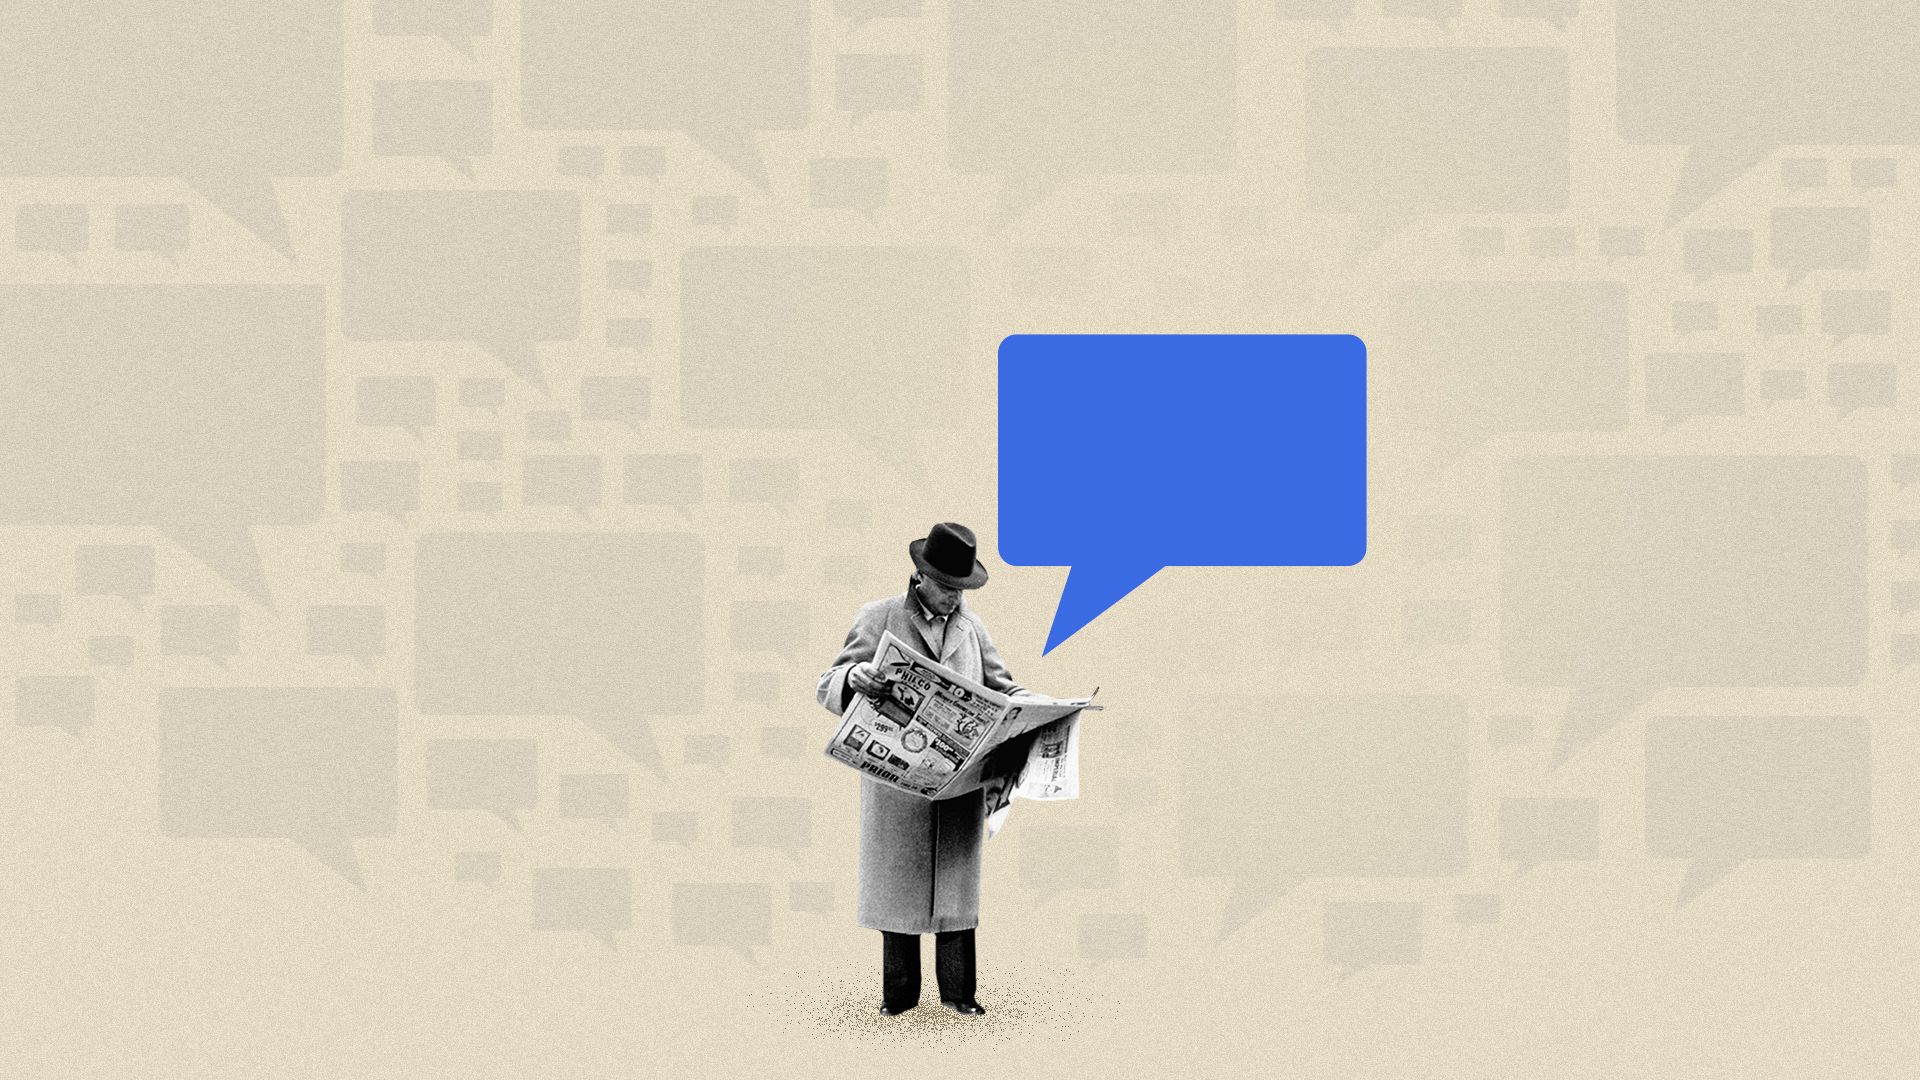 Photo illustration of a man reading a newspaper surrounded by speech bubbles